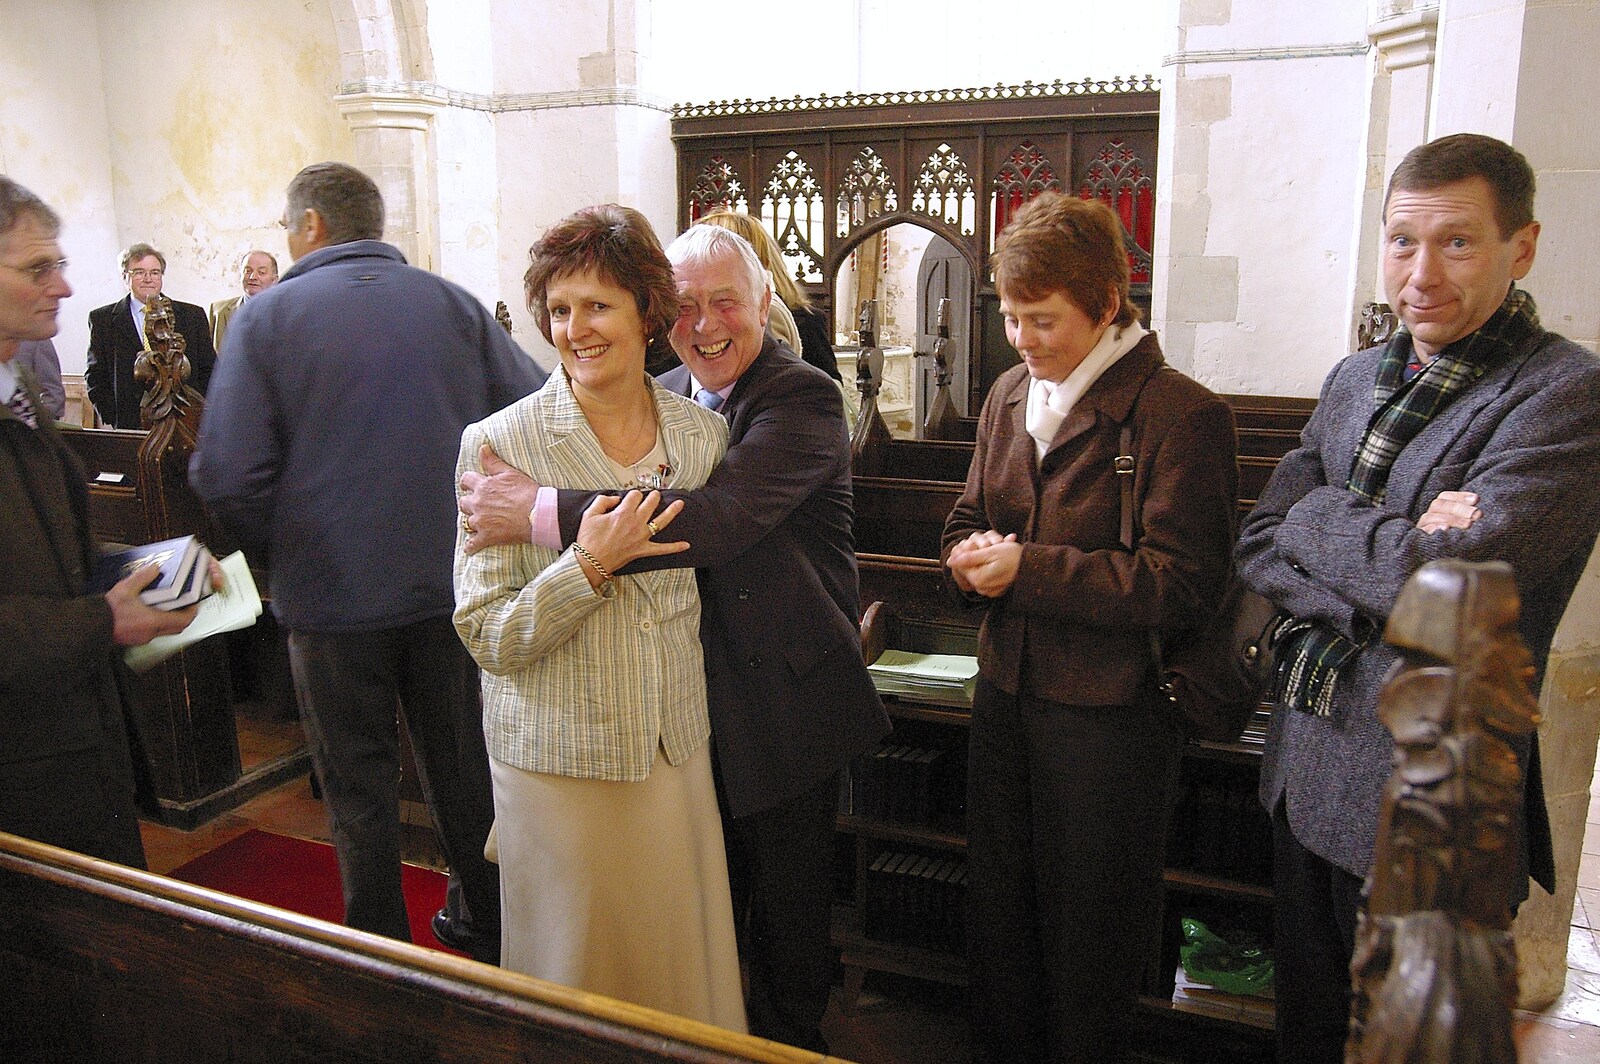 Colin gives Jill a hug as Apple looks surprised from Clairesprog Christening, Church of St. Margaret of Antioch, Thrandeston, Suffolk - 19th March 2006